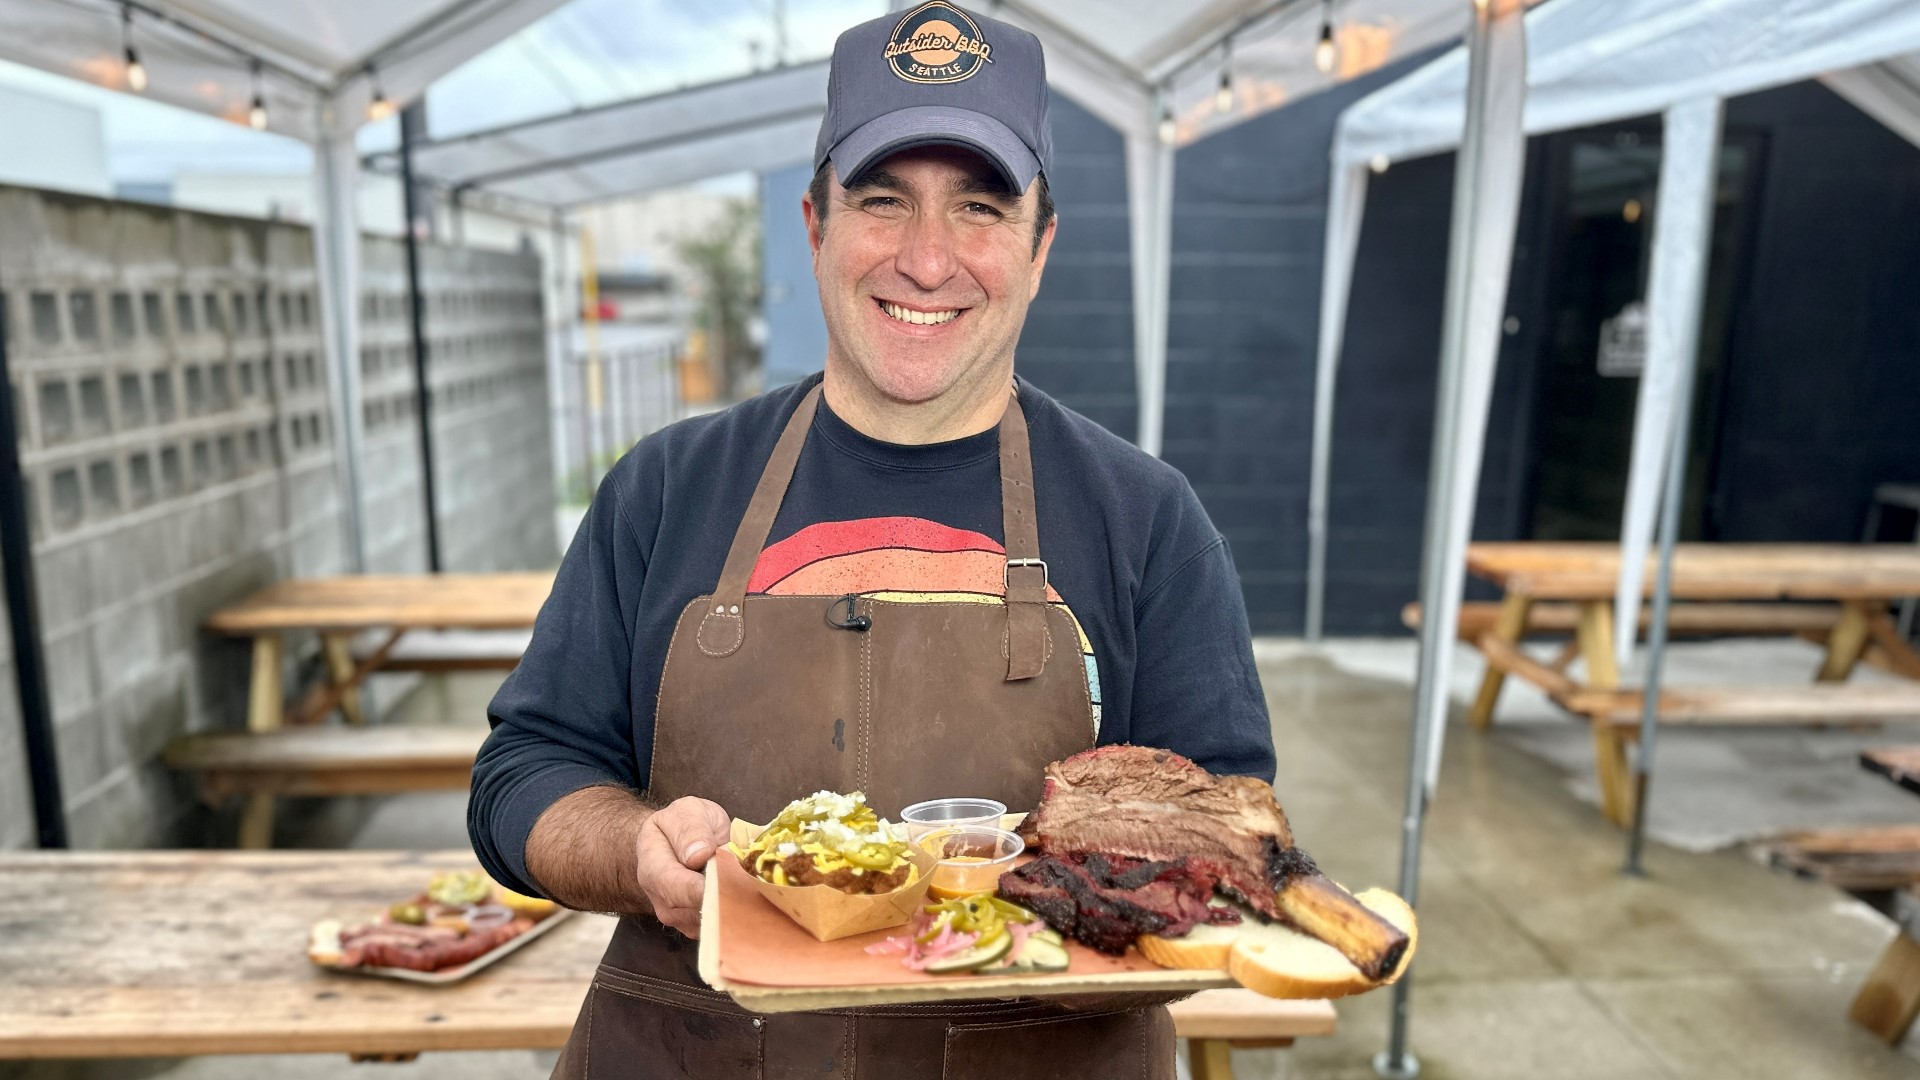 Outsider BBQ is owned and operated by Onur Gulbay, who hails from Istanbul. #k5evening